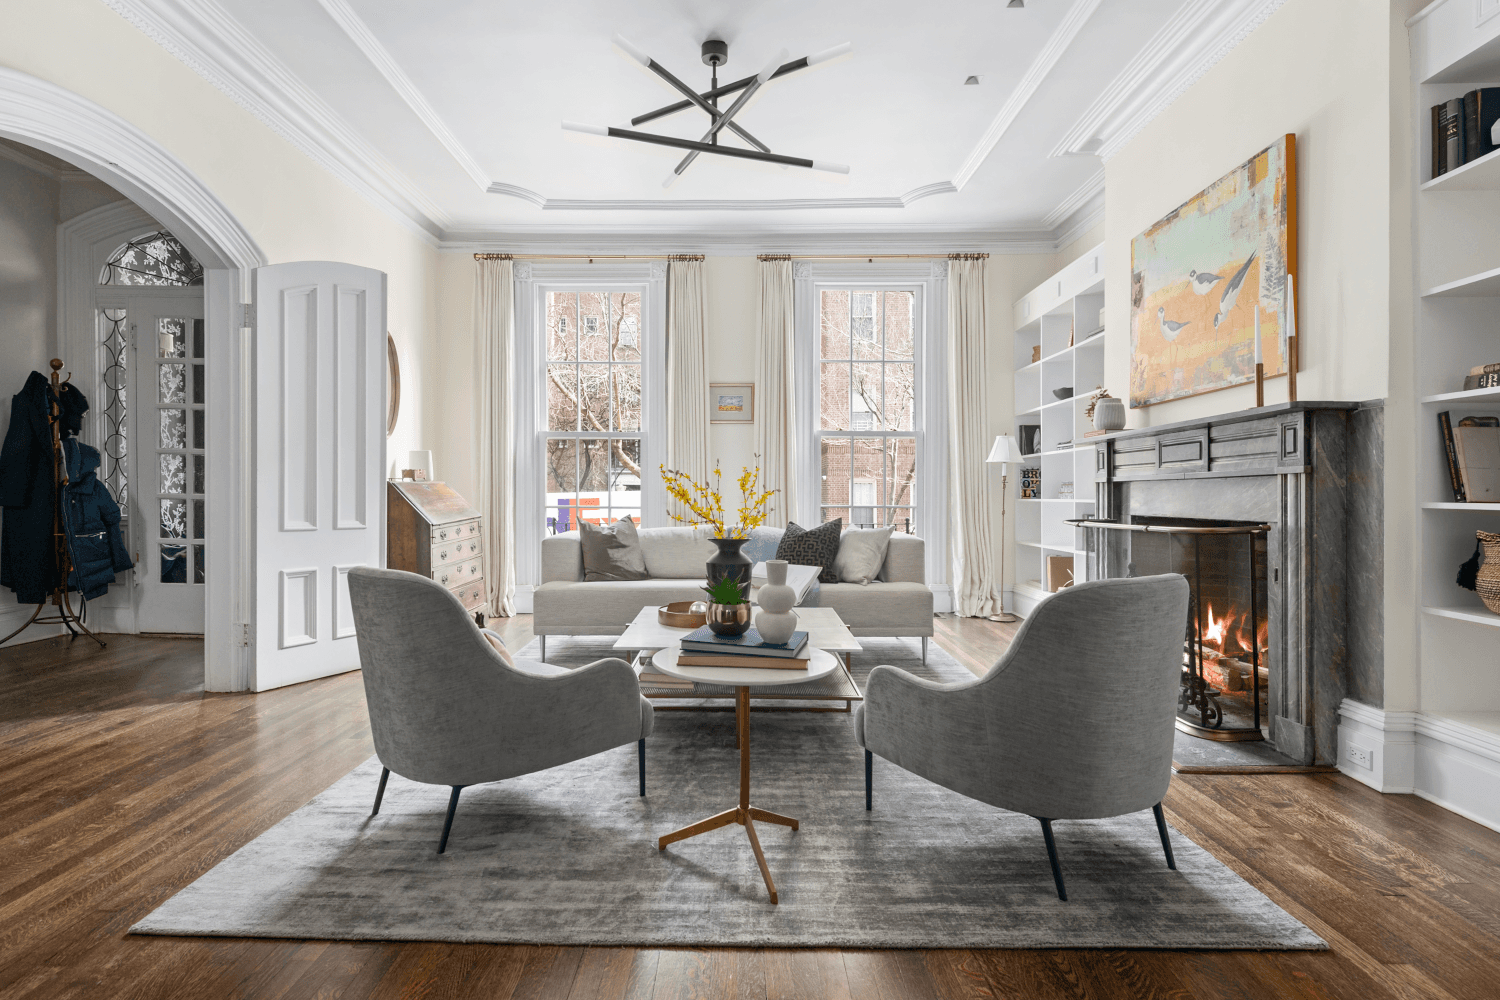 Nestled in bucolic Brooklyn Heights, 146 Hicks Street is a beautifully renovated two family townhouse that exudes historic charm and modern luxury.